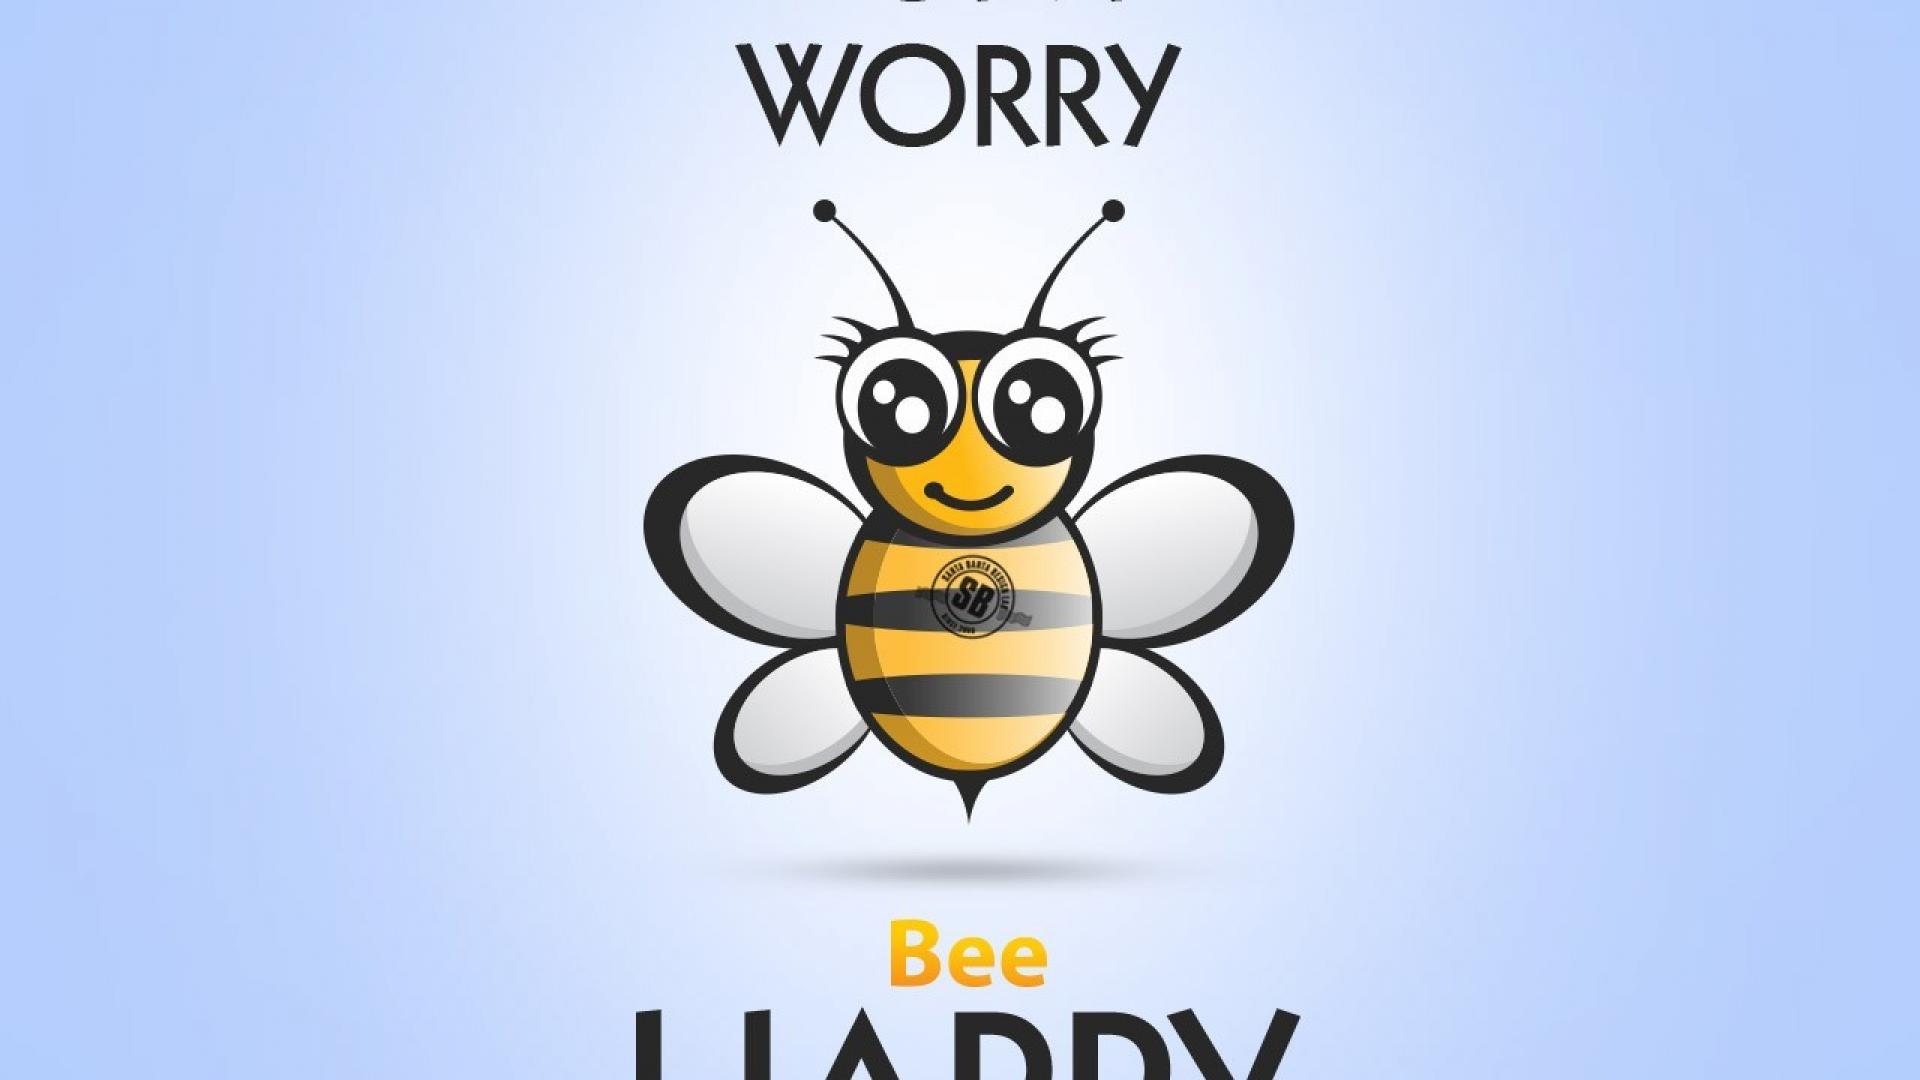 Don t worry dont. Don't worry be Happy. Донт вори би Хэппи. Don t worry be Happy картинки. Надпись don't worry be Happy.